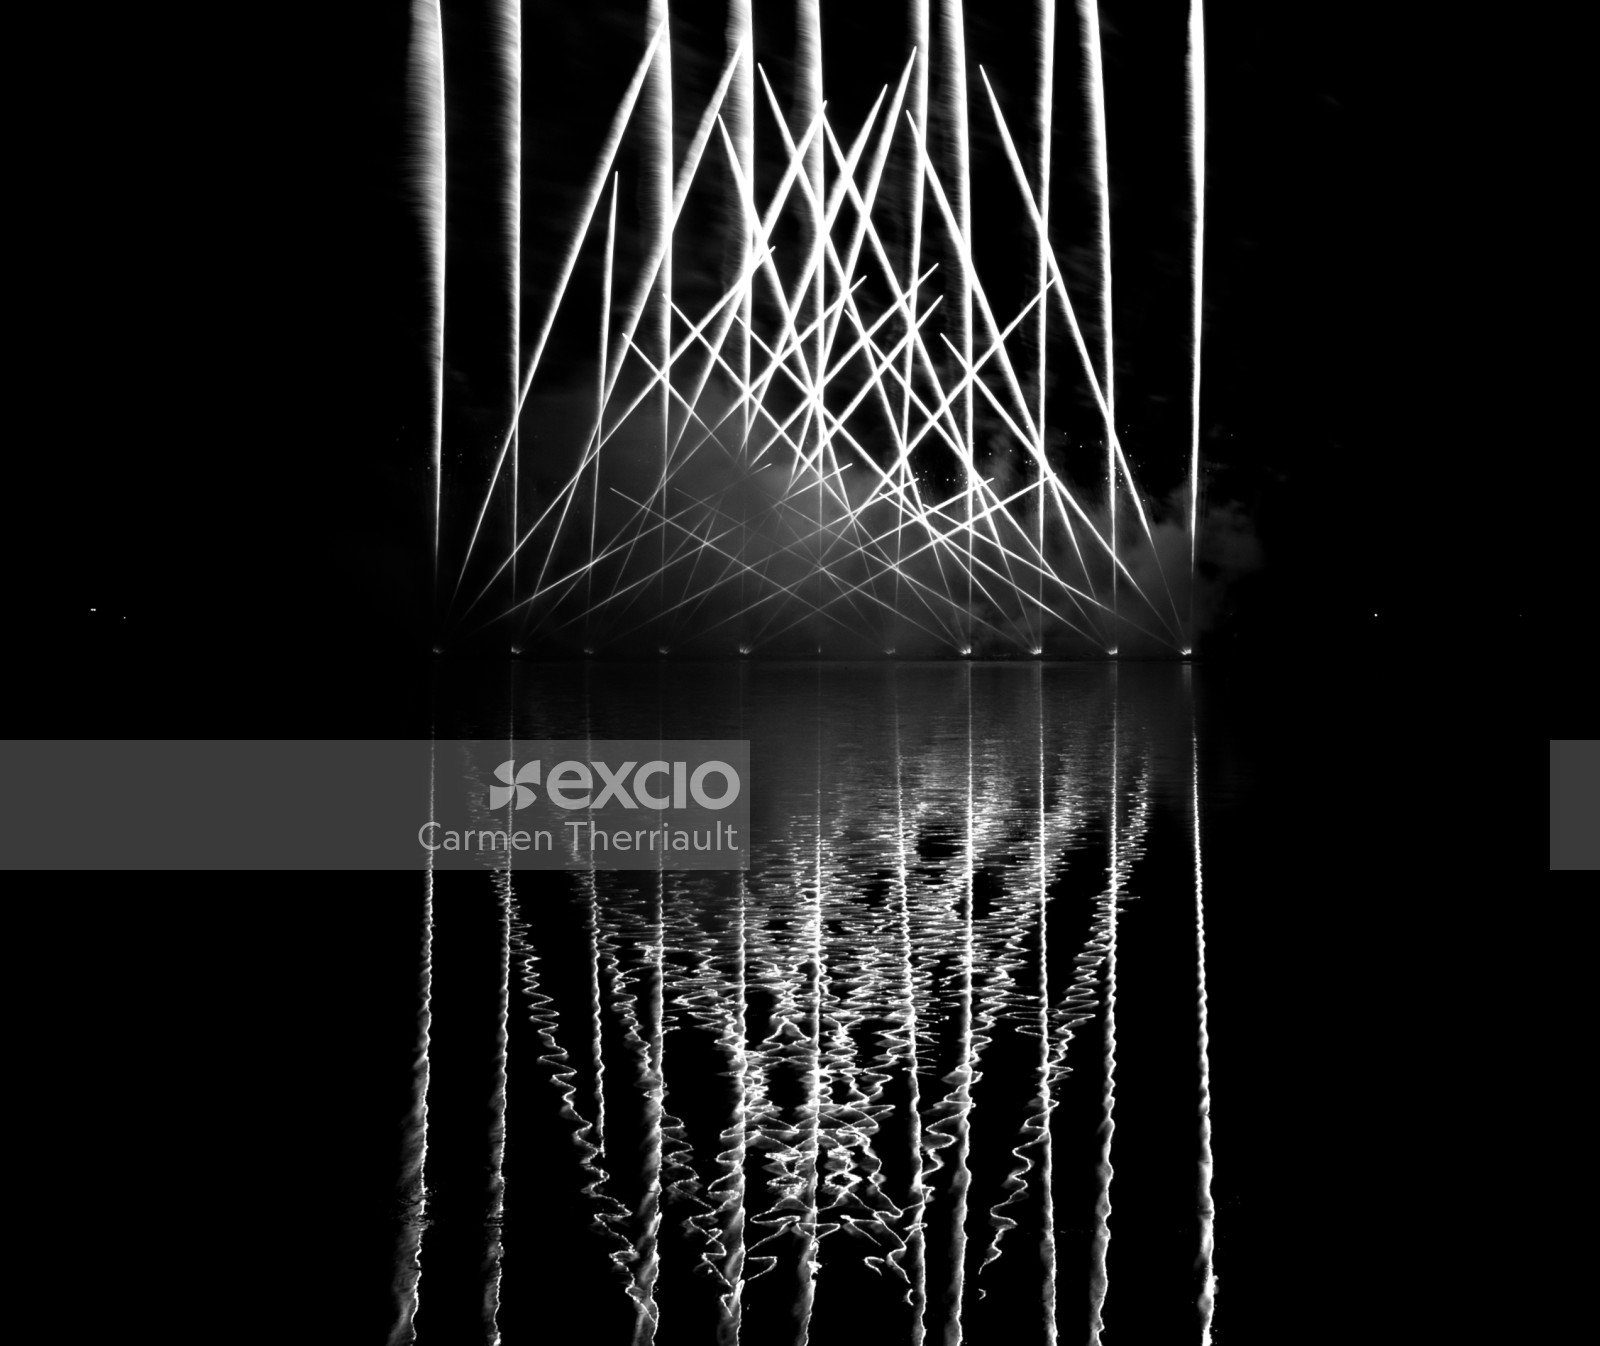 Reflected fireworks in Black and White